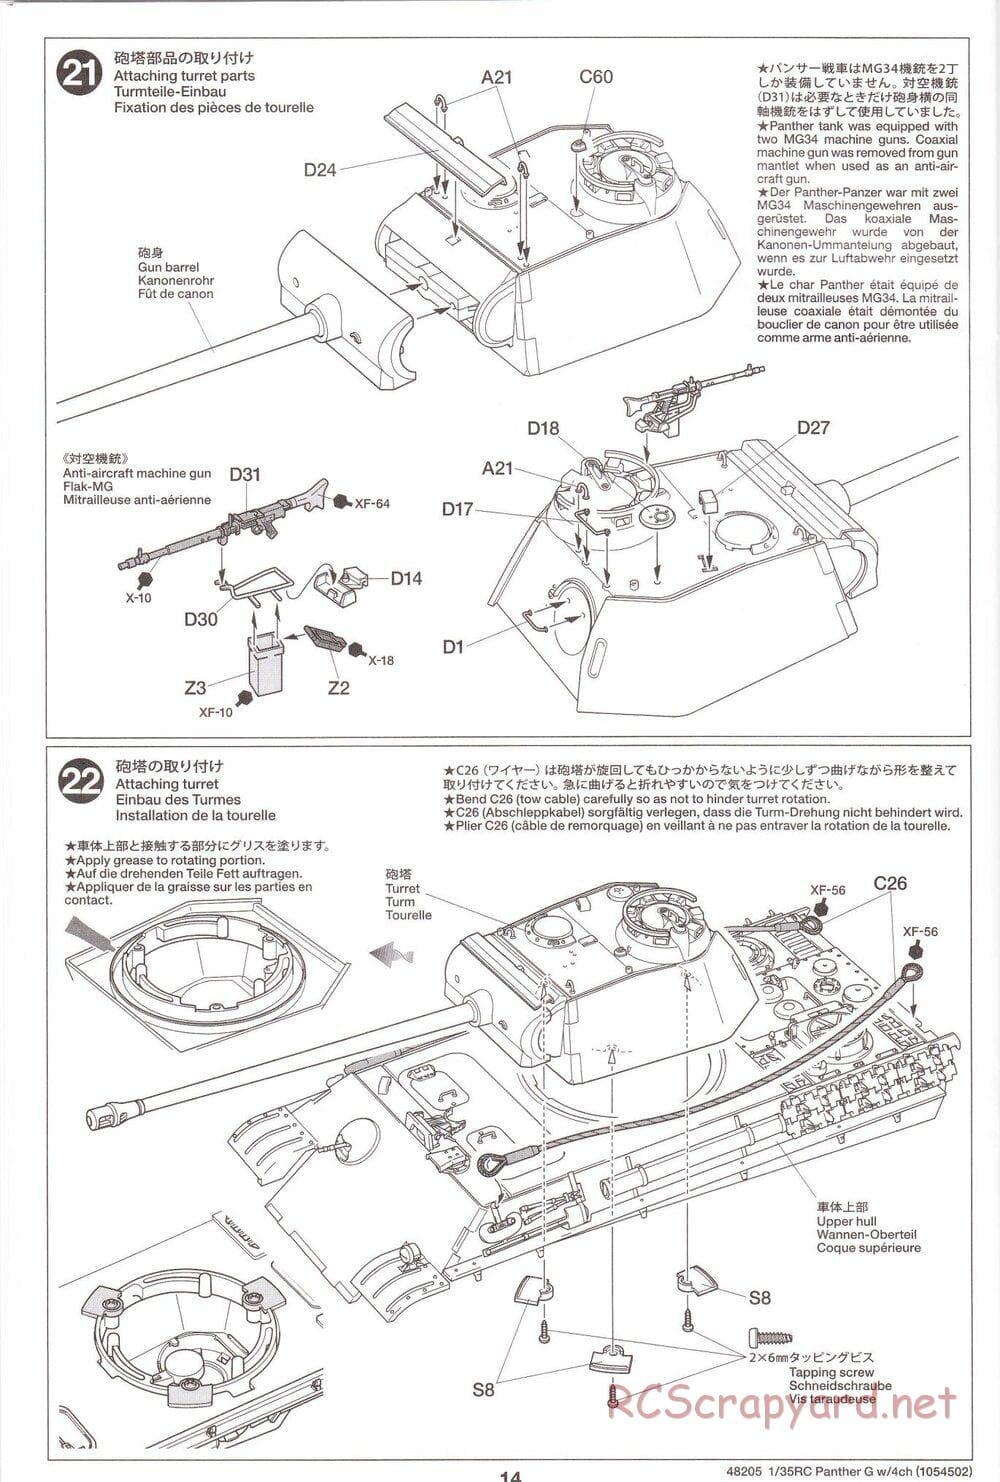 Tamiya - German Panther Type G - 1/35 Scale Chassis - Manual - Page 14